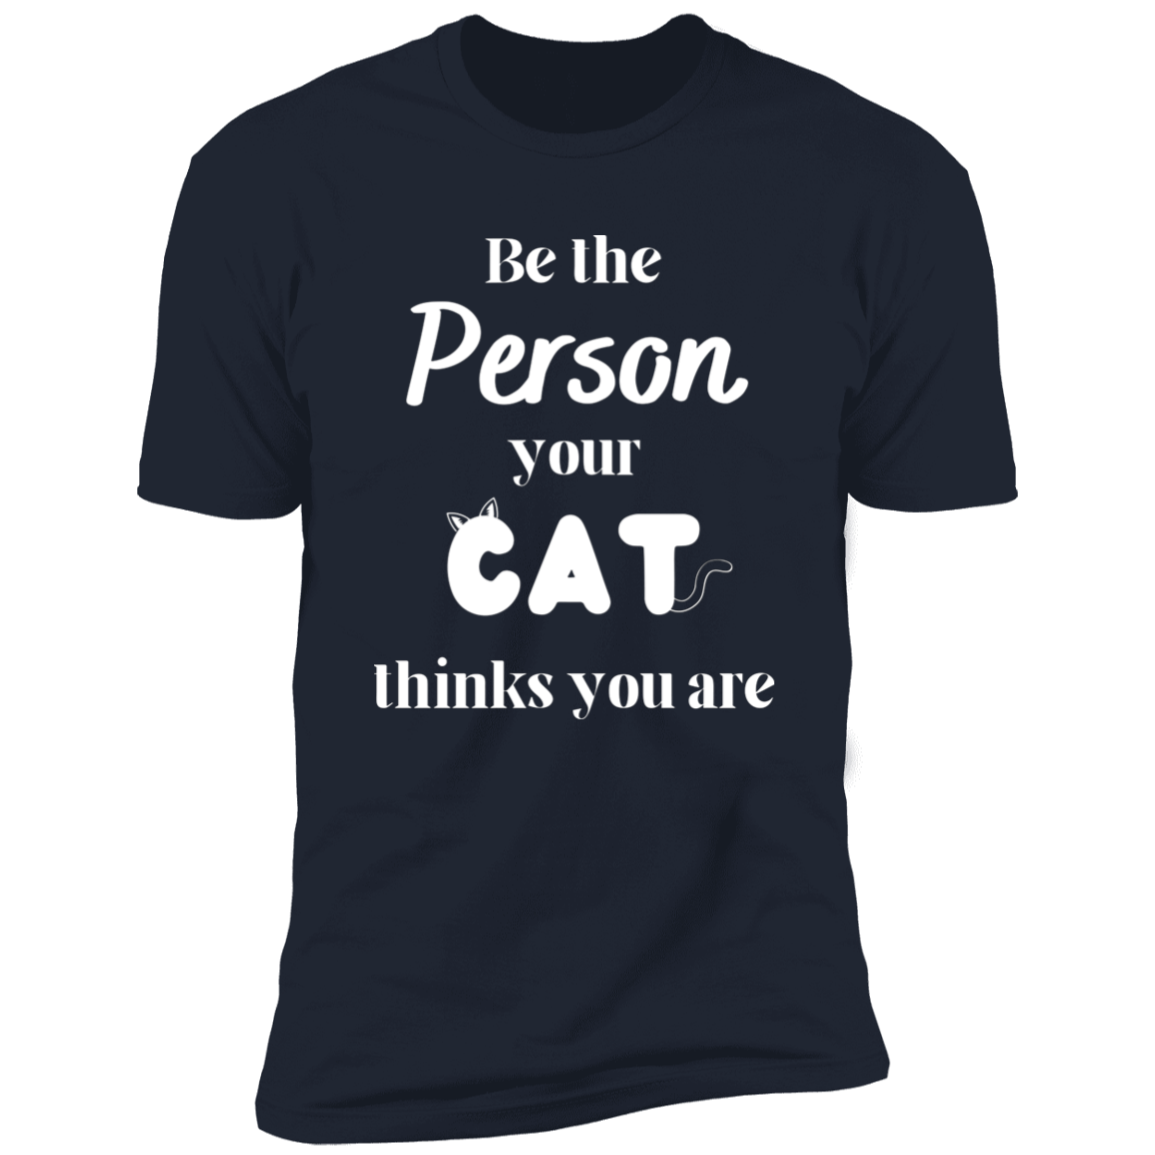 Be the Person Your Cat Thinks You Are T-shirt, Cat Shirt for humans, in navy blue